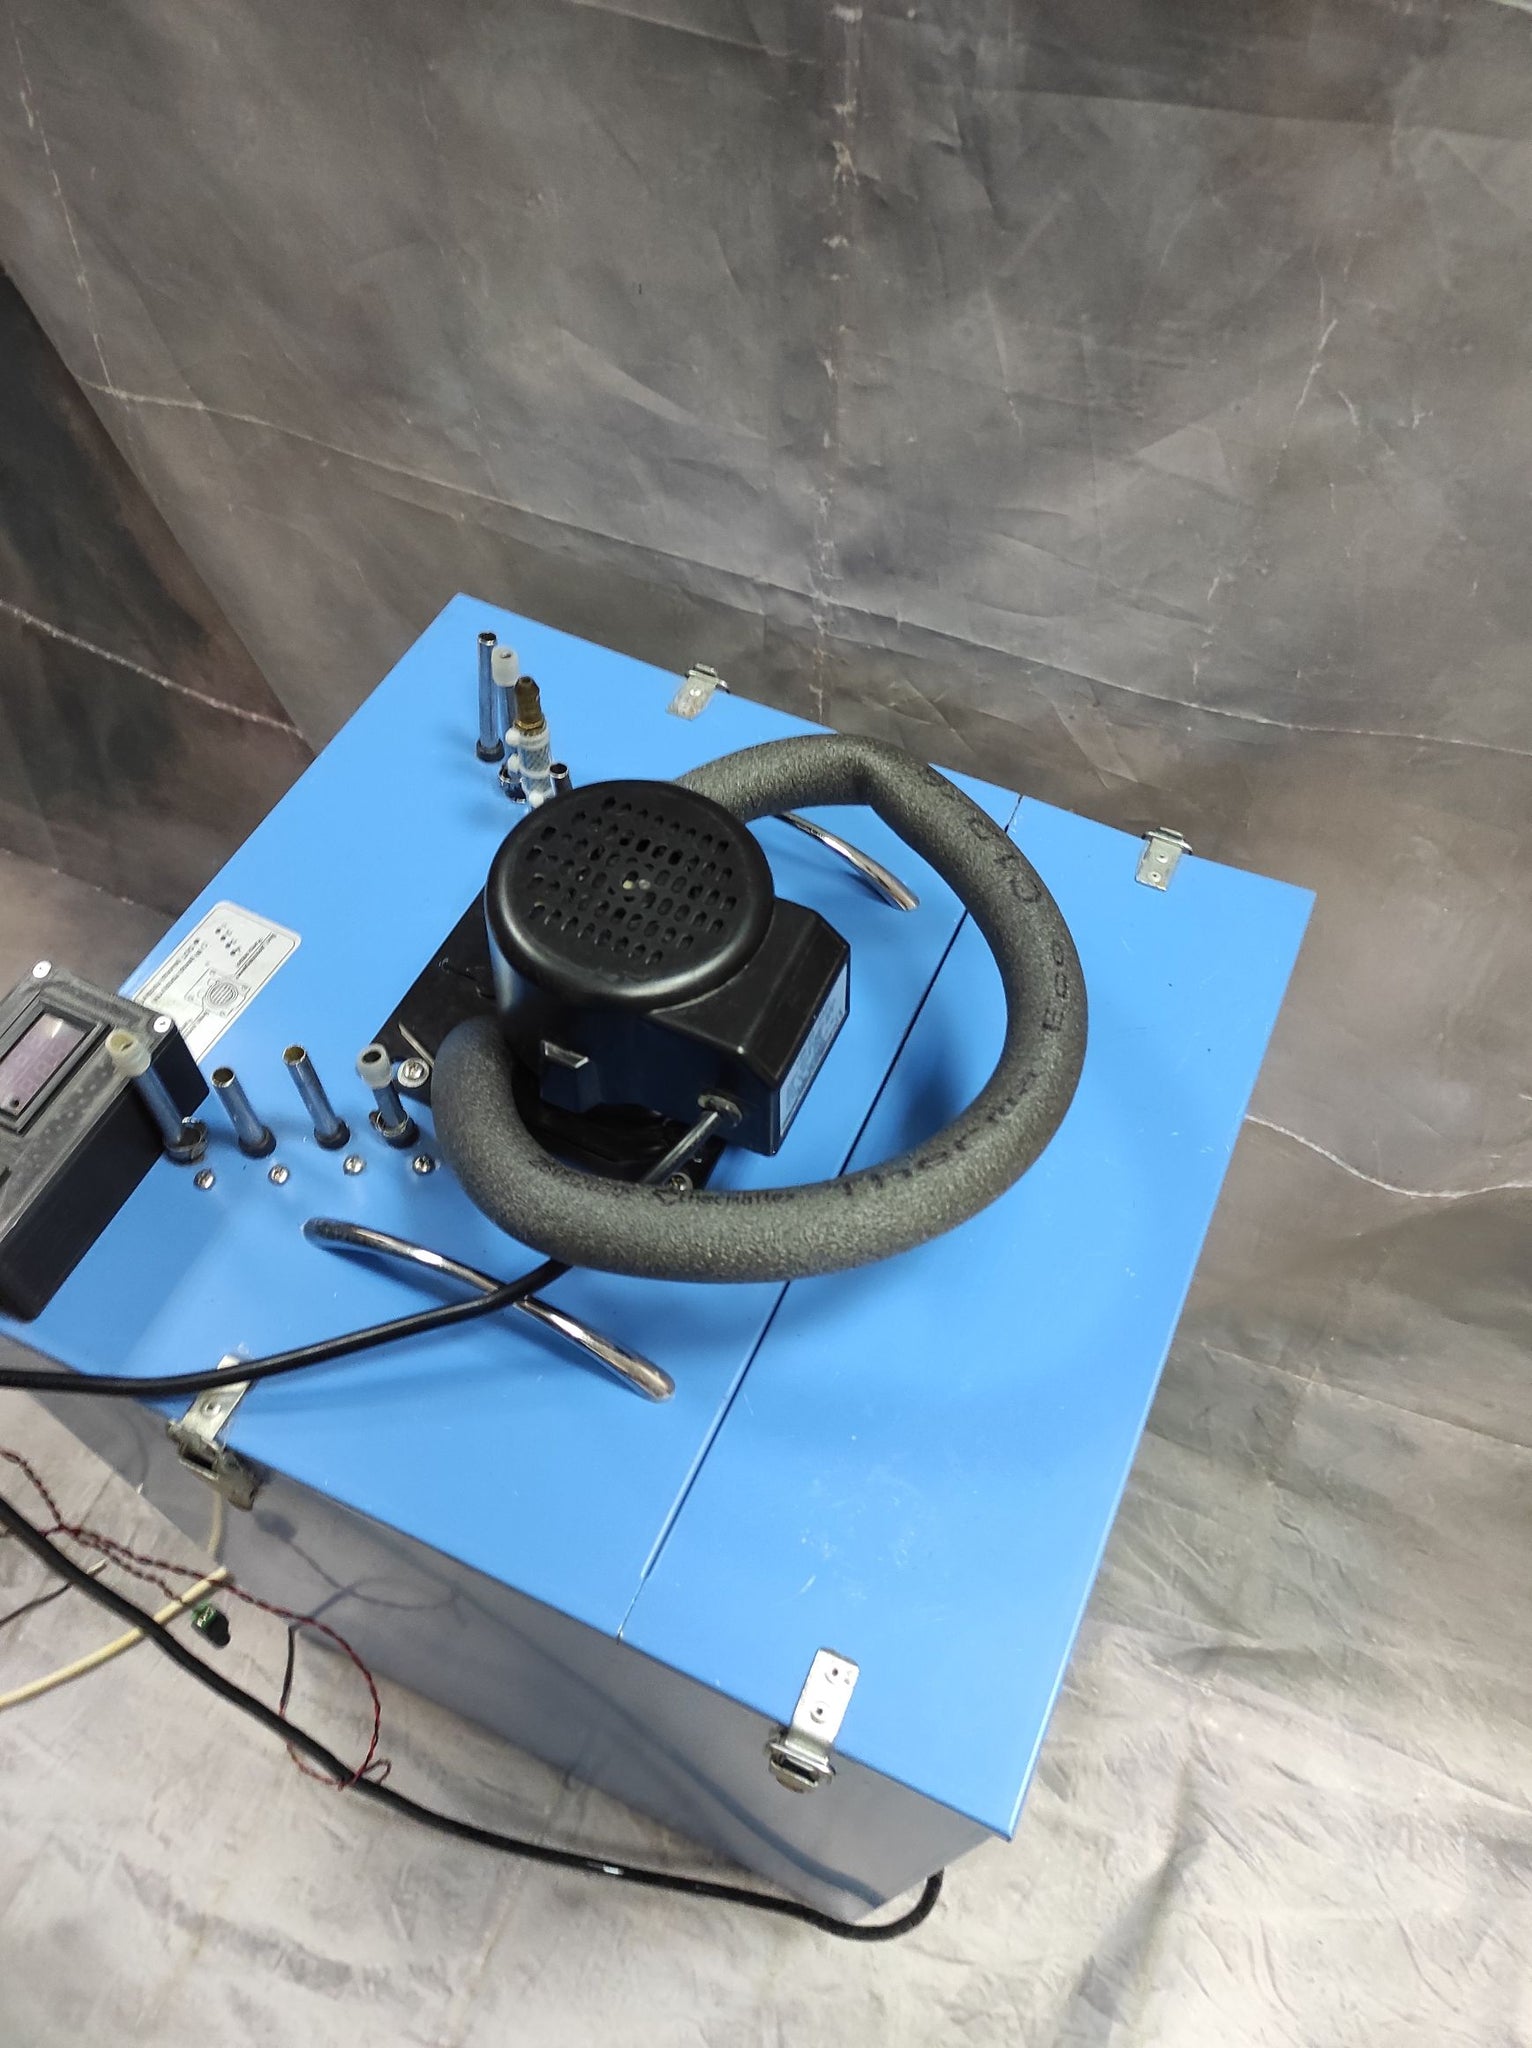 A industrial water chiller for DPSS, fiber, Co2 lasers – Endurance Lasers